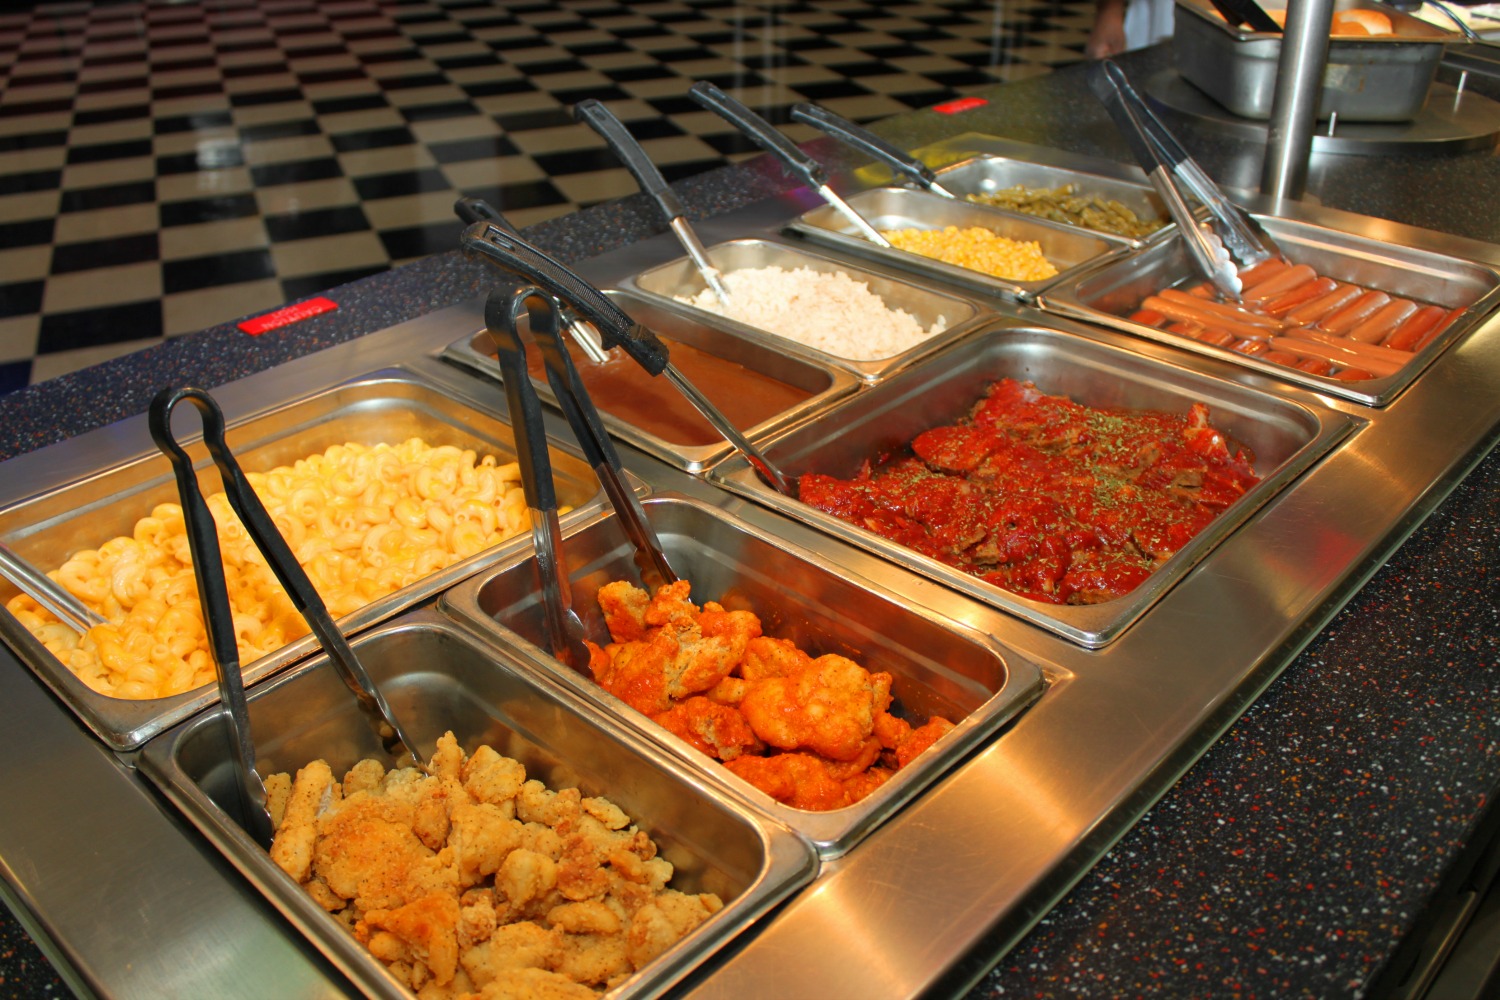 The buffet offers a wide variety of food in addition to pizza